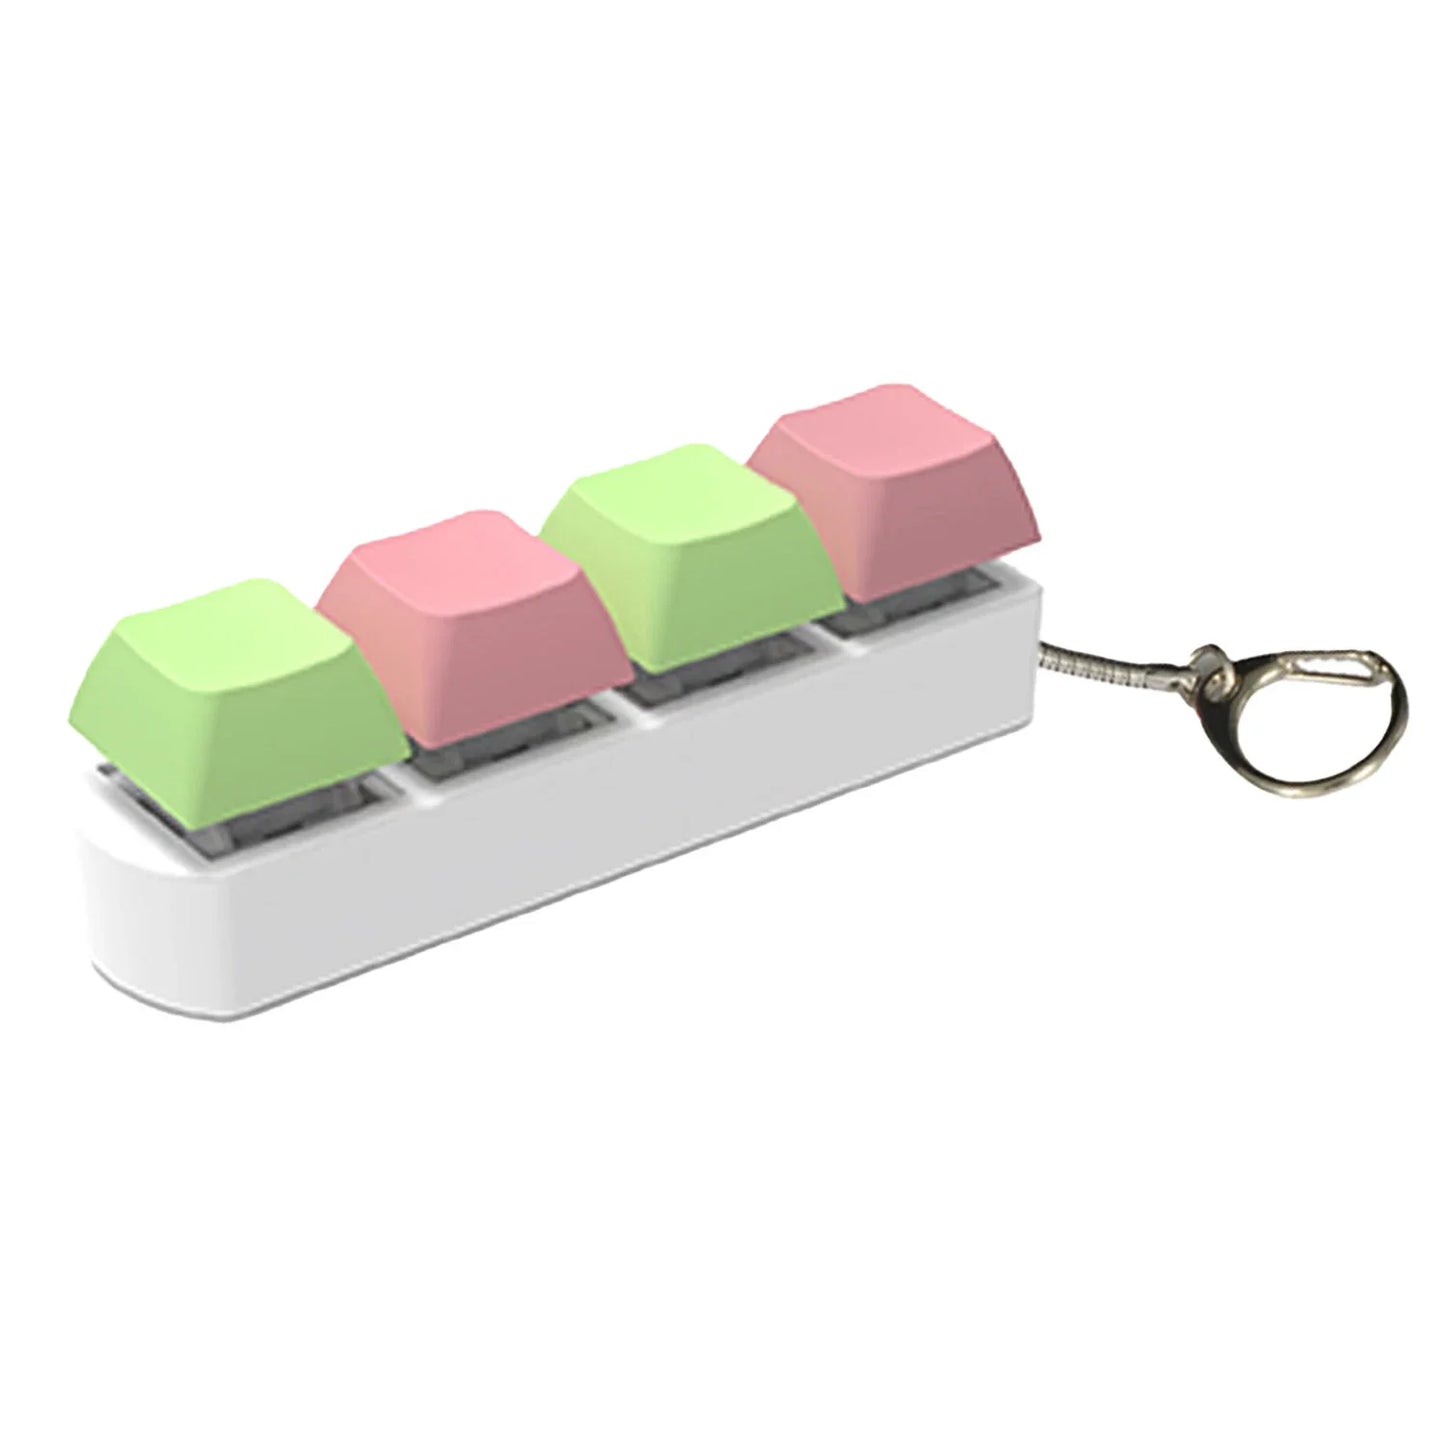 Keycap Toy Fidget with Sound Effects 4-Buttons Light Portable Stress Relief Mechanical Keyboard Clicking Sensory Keychain Green and pink